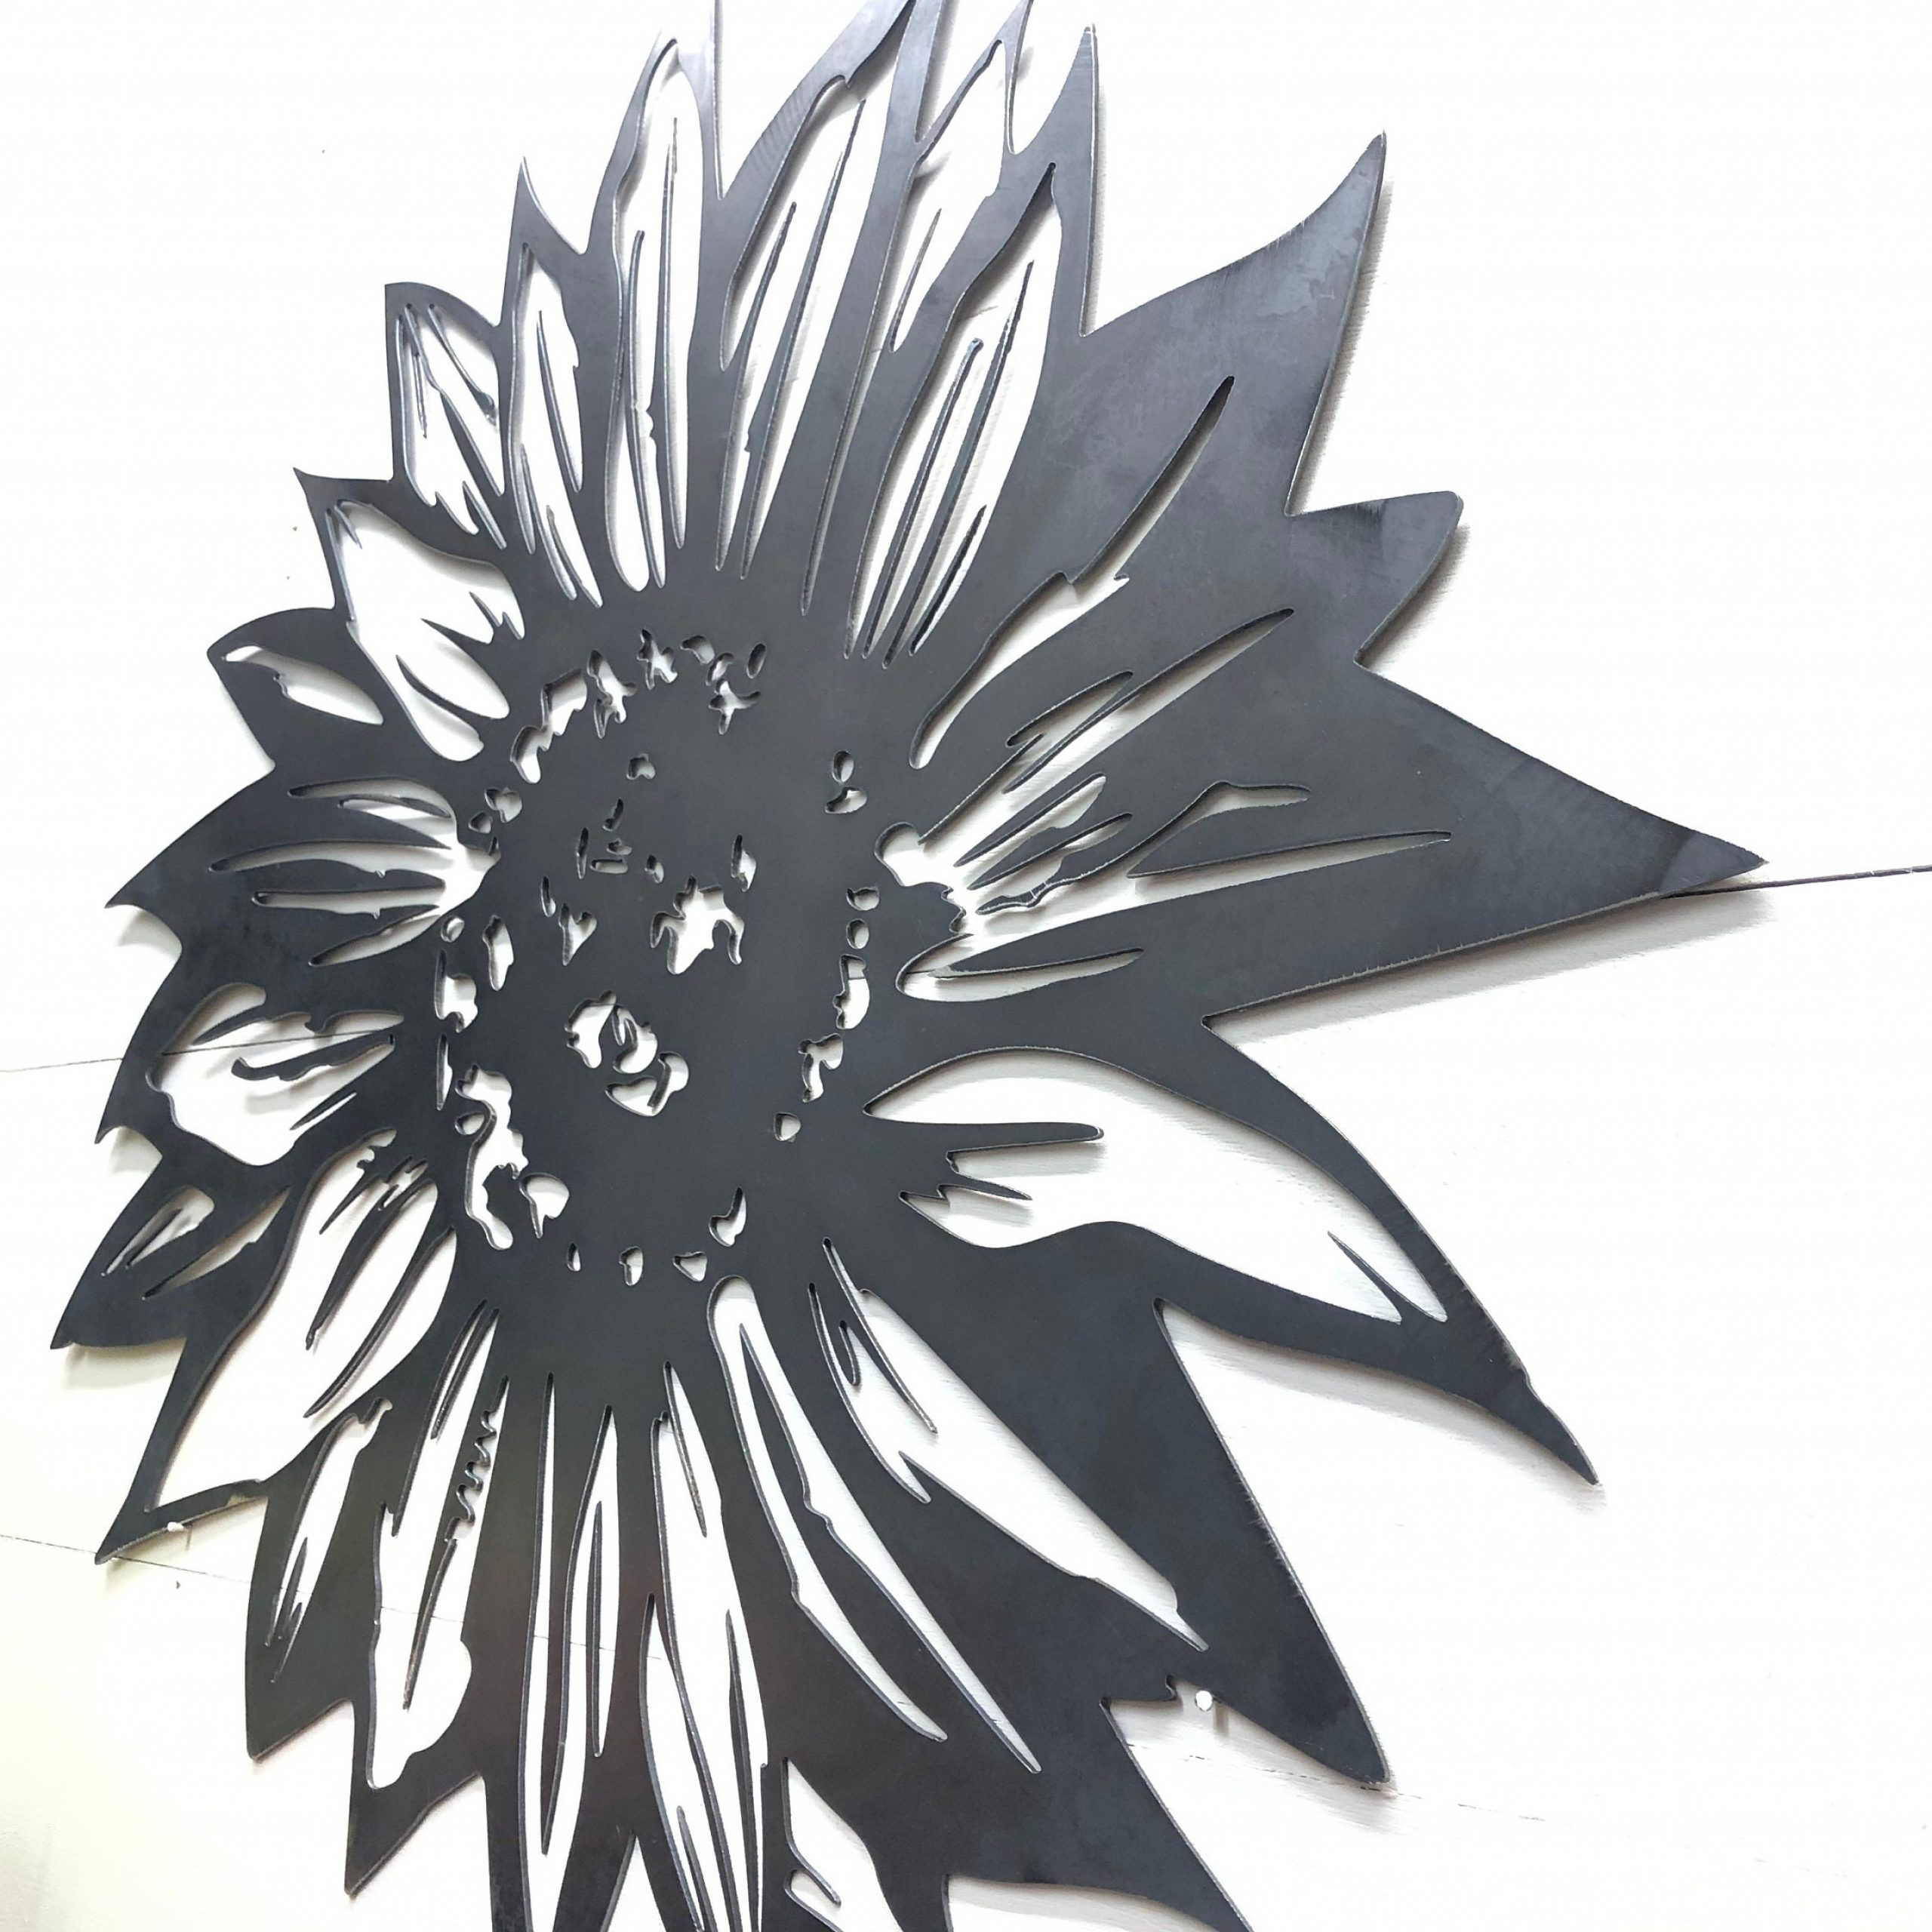 Rustic Industrial Sunflower Metal Wall Decor Pertaining To Industrial Metal Wall Art (View 8 of 15)